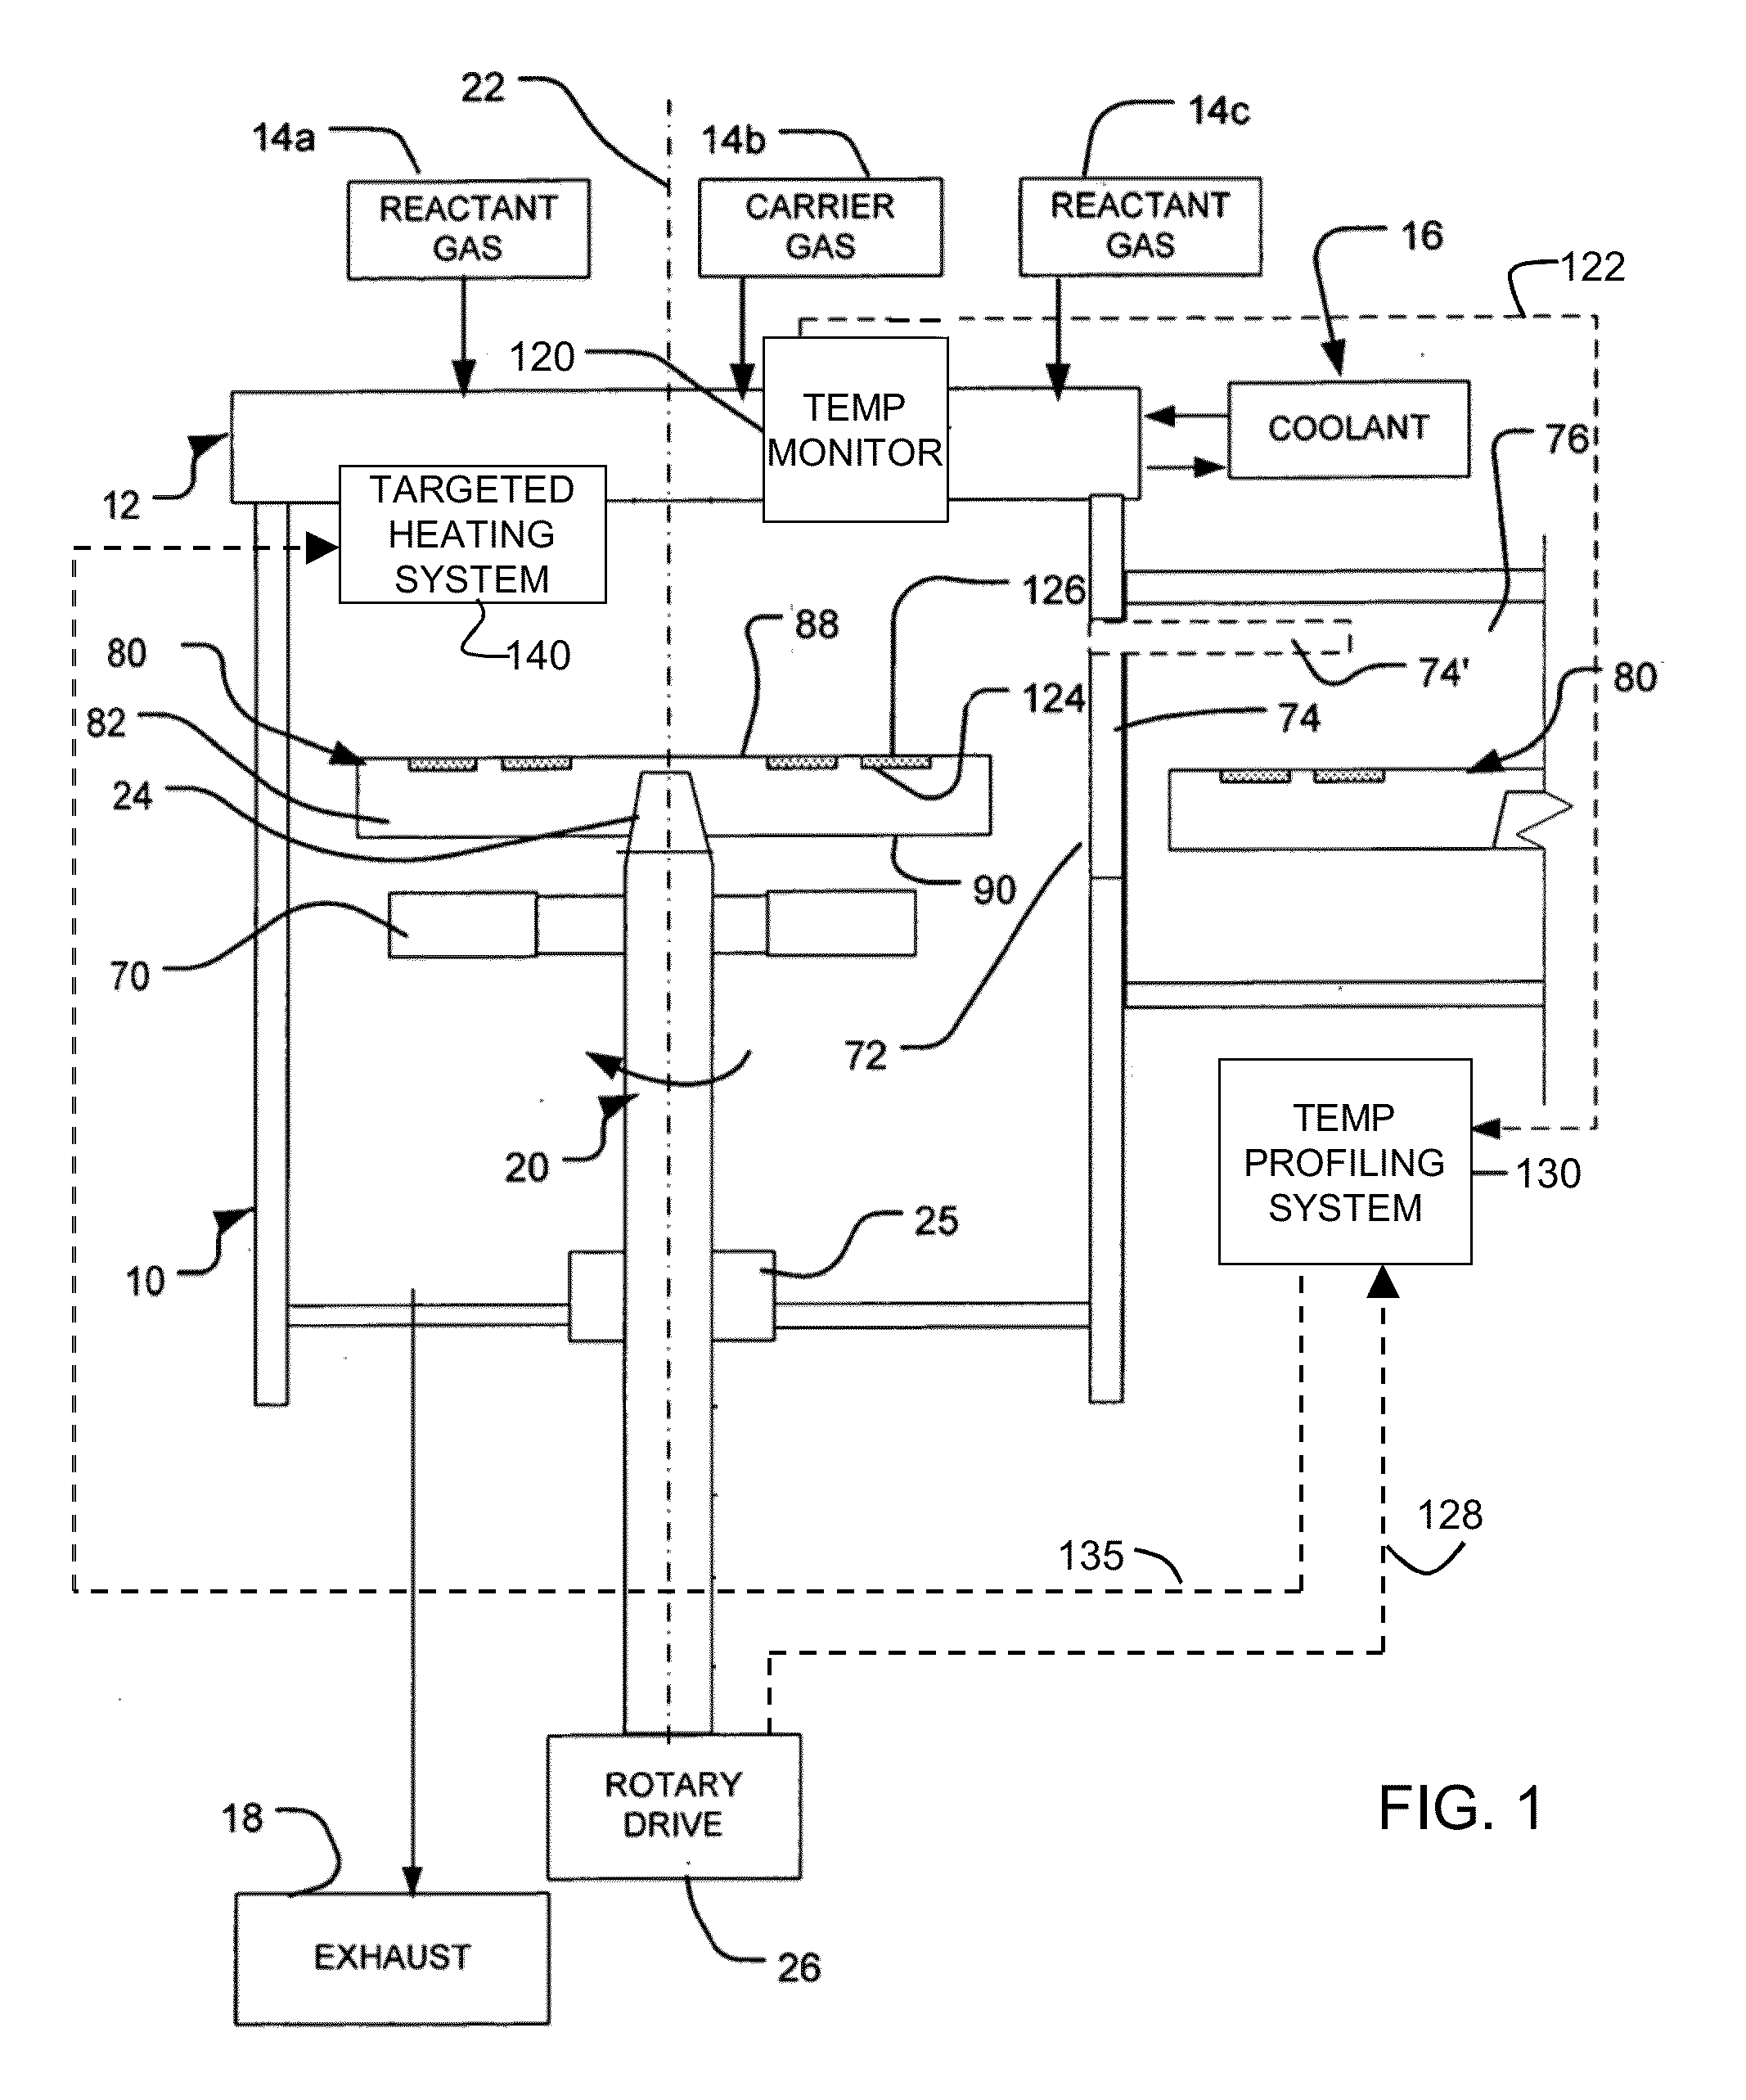 Targeted temperature compensation in chemical vapor deposition systems